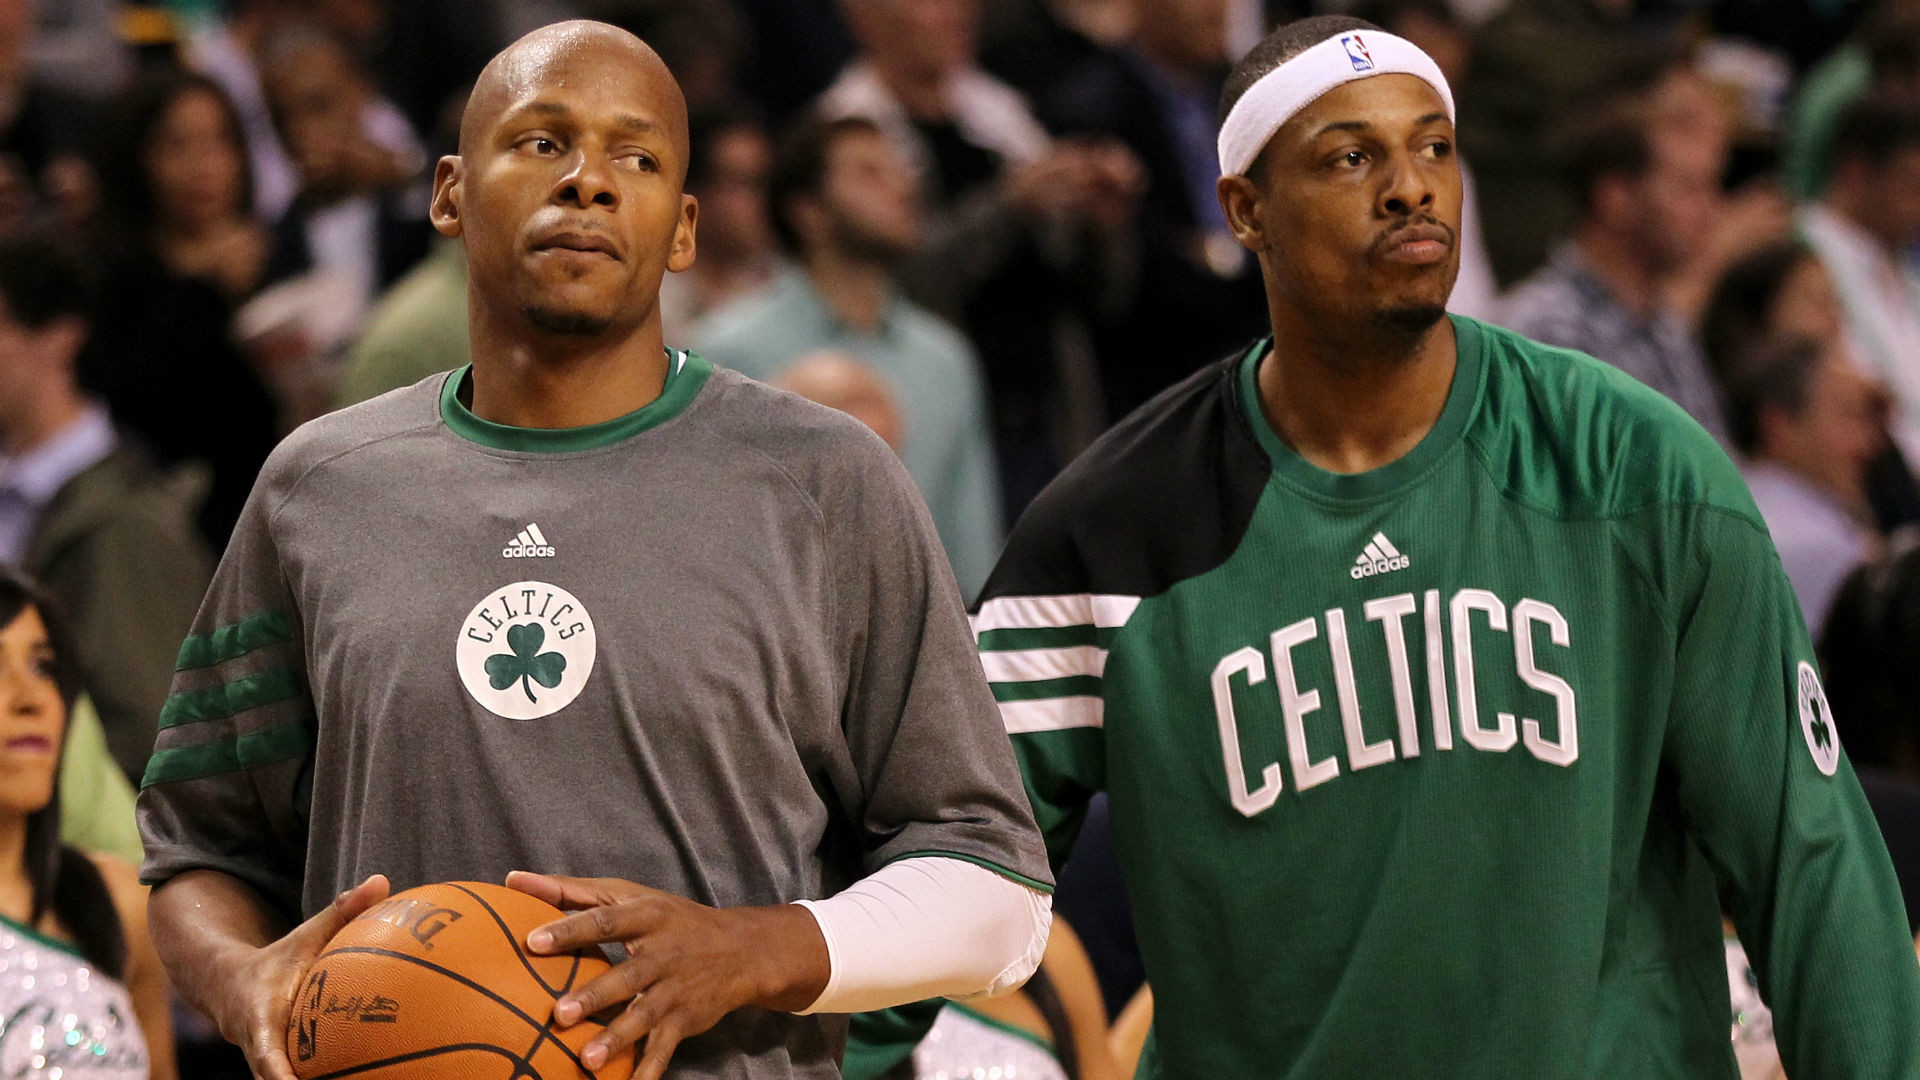 1920x1080 Ray Allen hopes to move on from 2008 Celtics feud | NBA | Sporting News